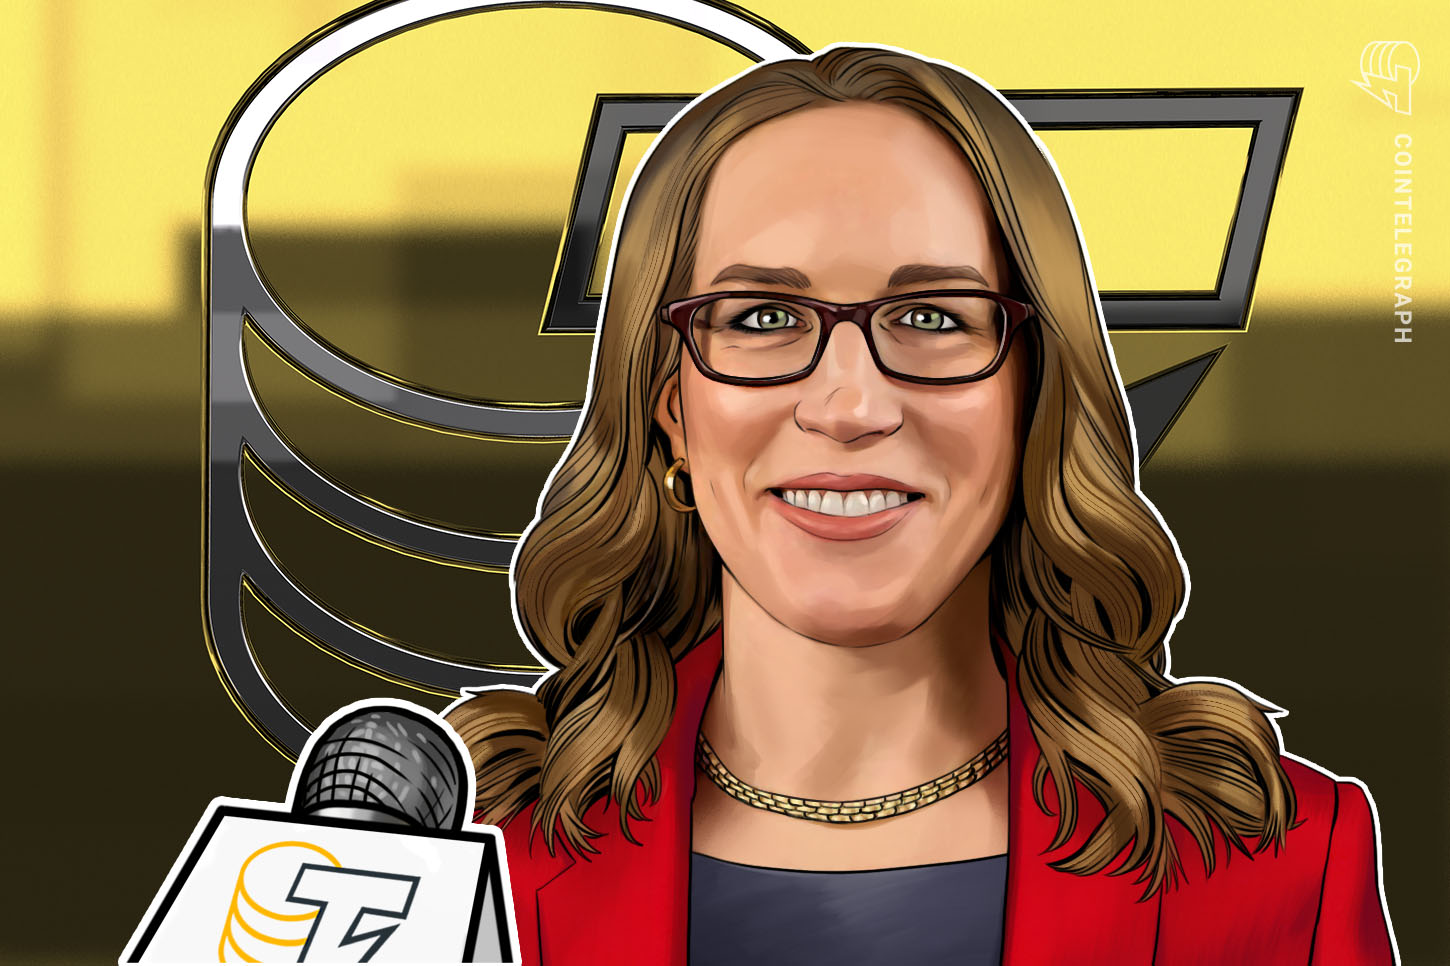 Beginning Second Time period As we speak, SEC Commissioner Peirce Tells Cointelegraph Her Crypto Priorities